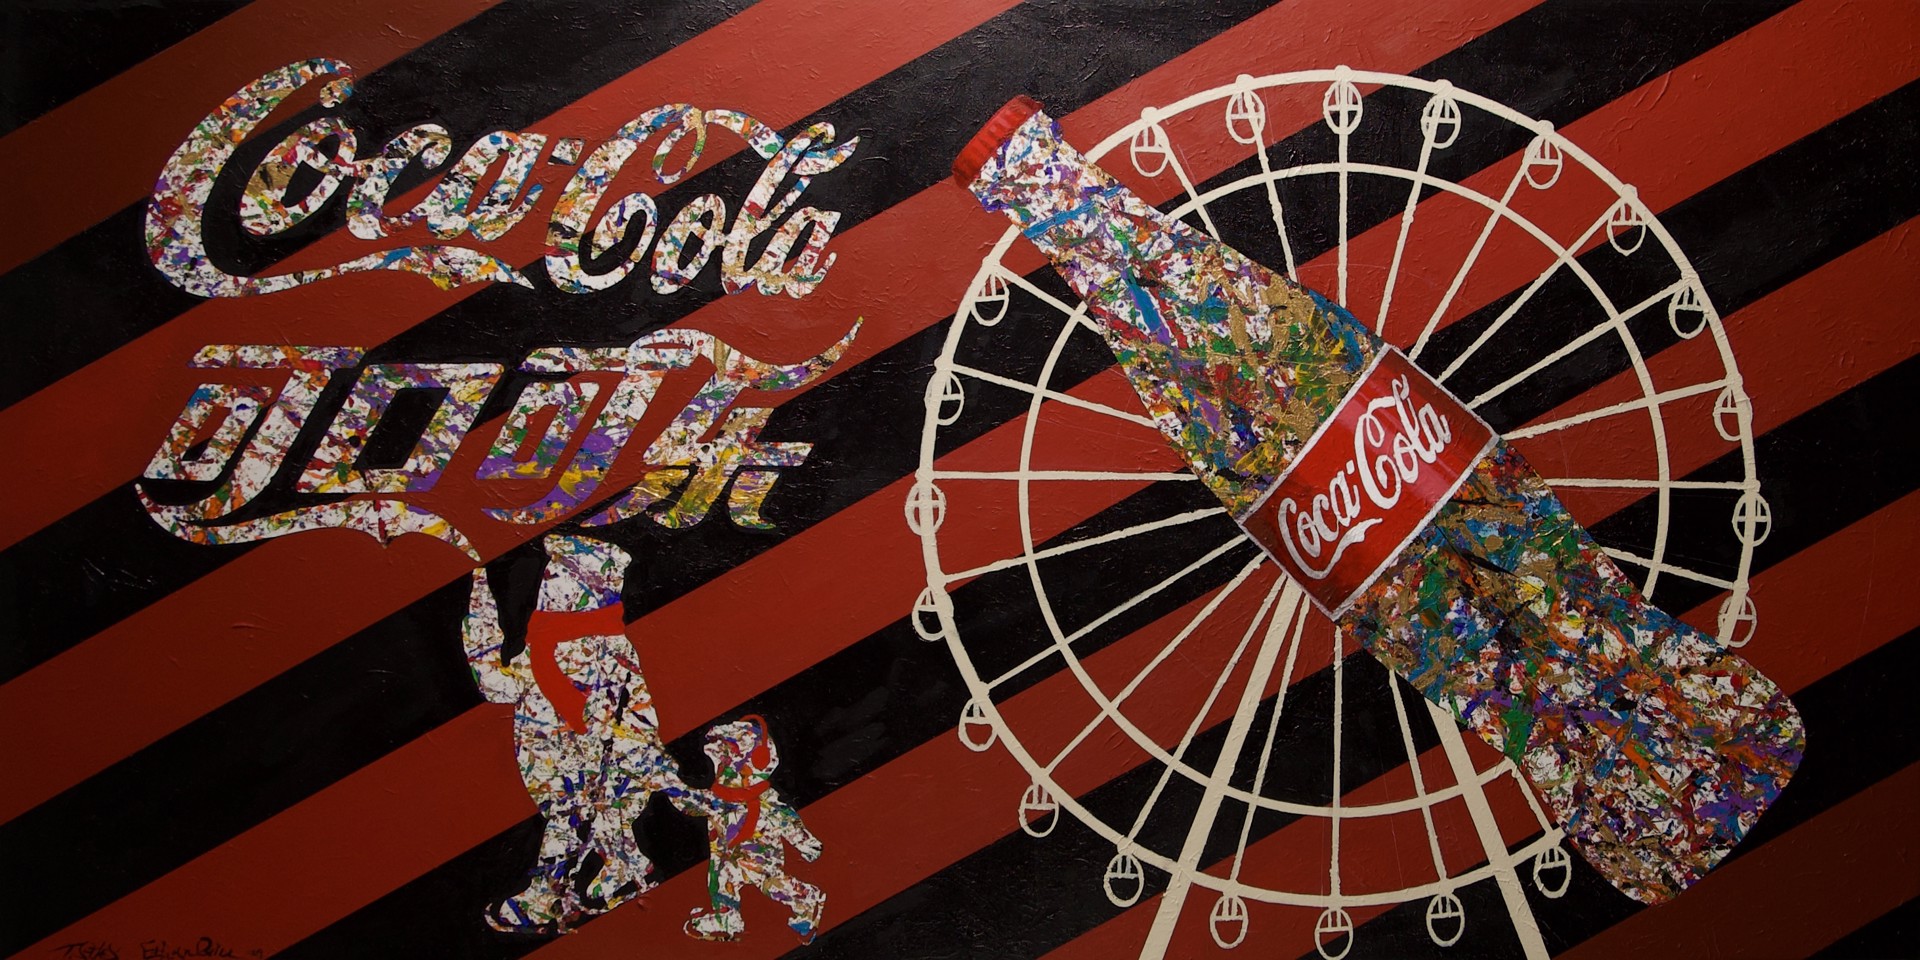 Coca-Cola X Billiart by Ethan Qiu and Tyler Stokes